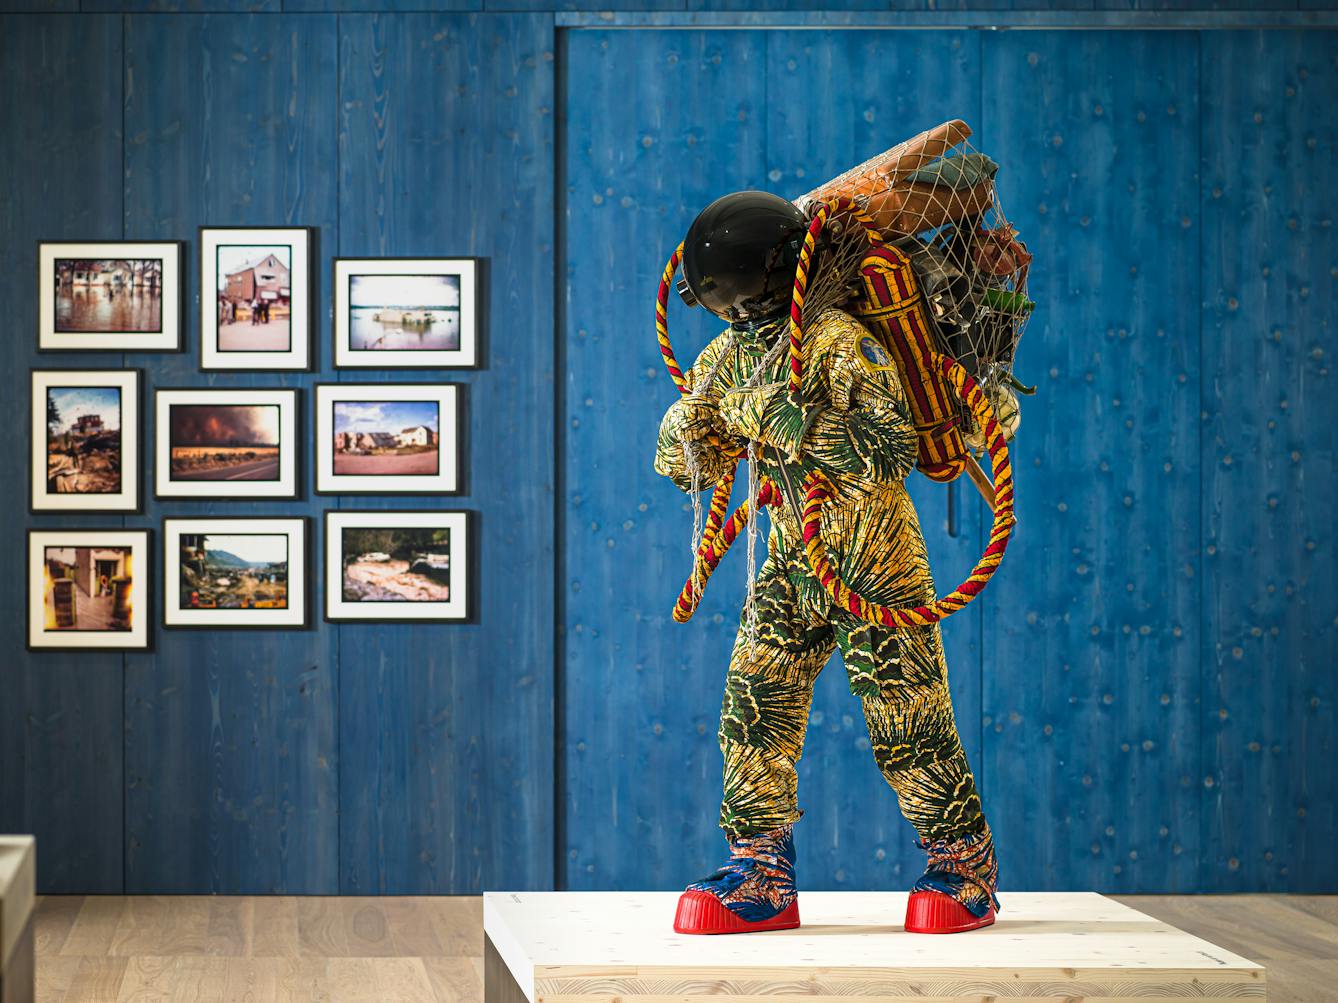 Photograph of an exhibition gallery space, with a blue stained wood wall in the background. In the foreground is a life-size artwork of a figure resembling an astronaut. carrying a large net containing assorted objects including a suitcase.